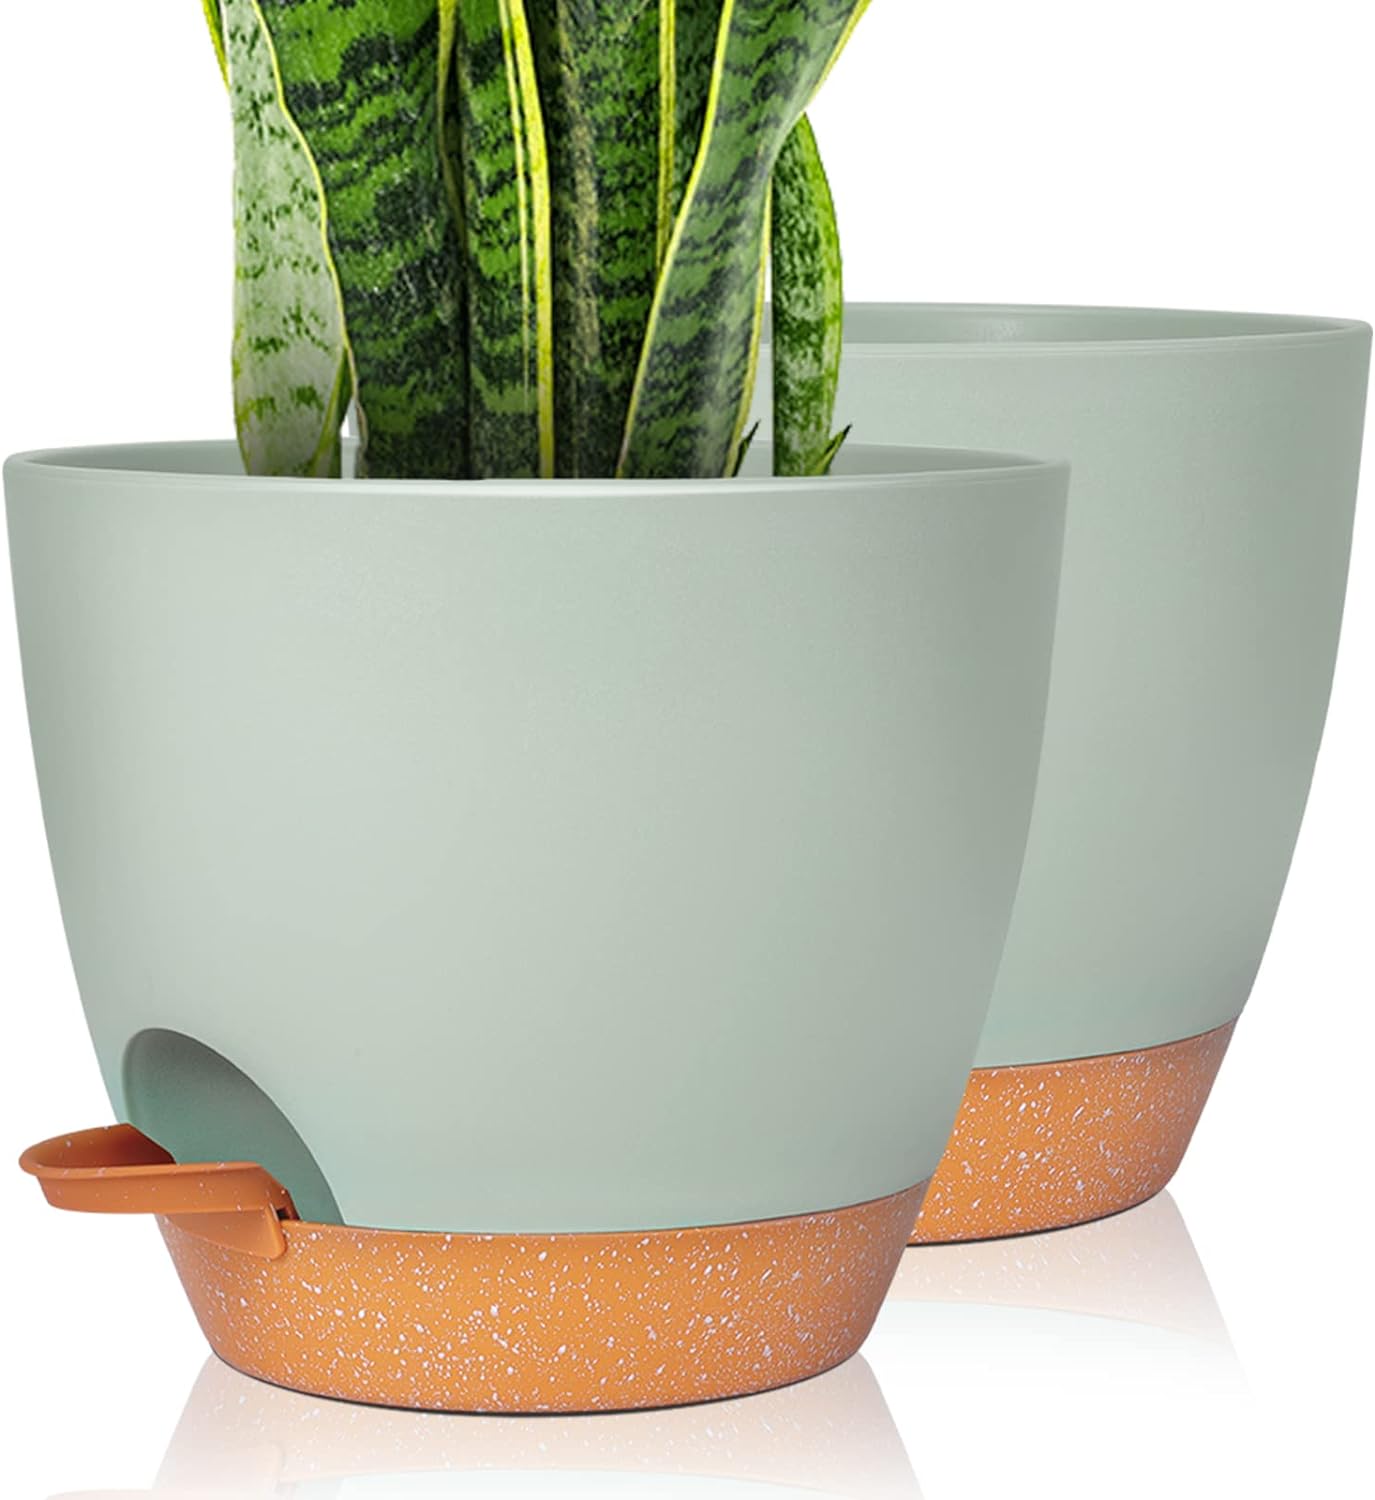 GARDIFE Plant Pots Set of 2 Pack 8 inch,Planters for Indoor Plants with Drainage Holes, Modern Decorative Flower Pots for All House Plants, Flowers, Green